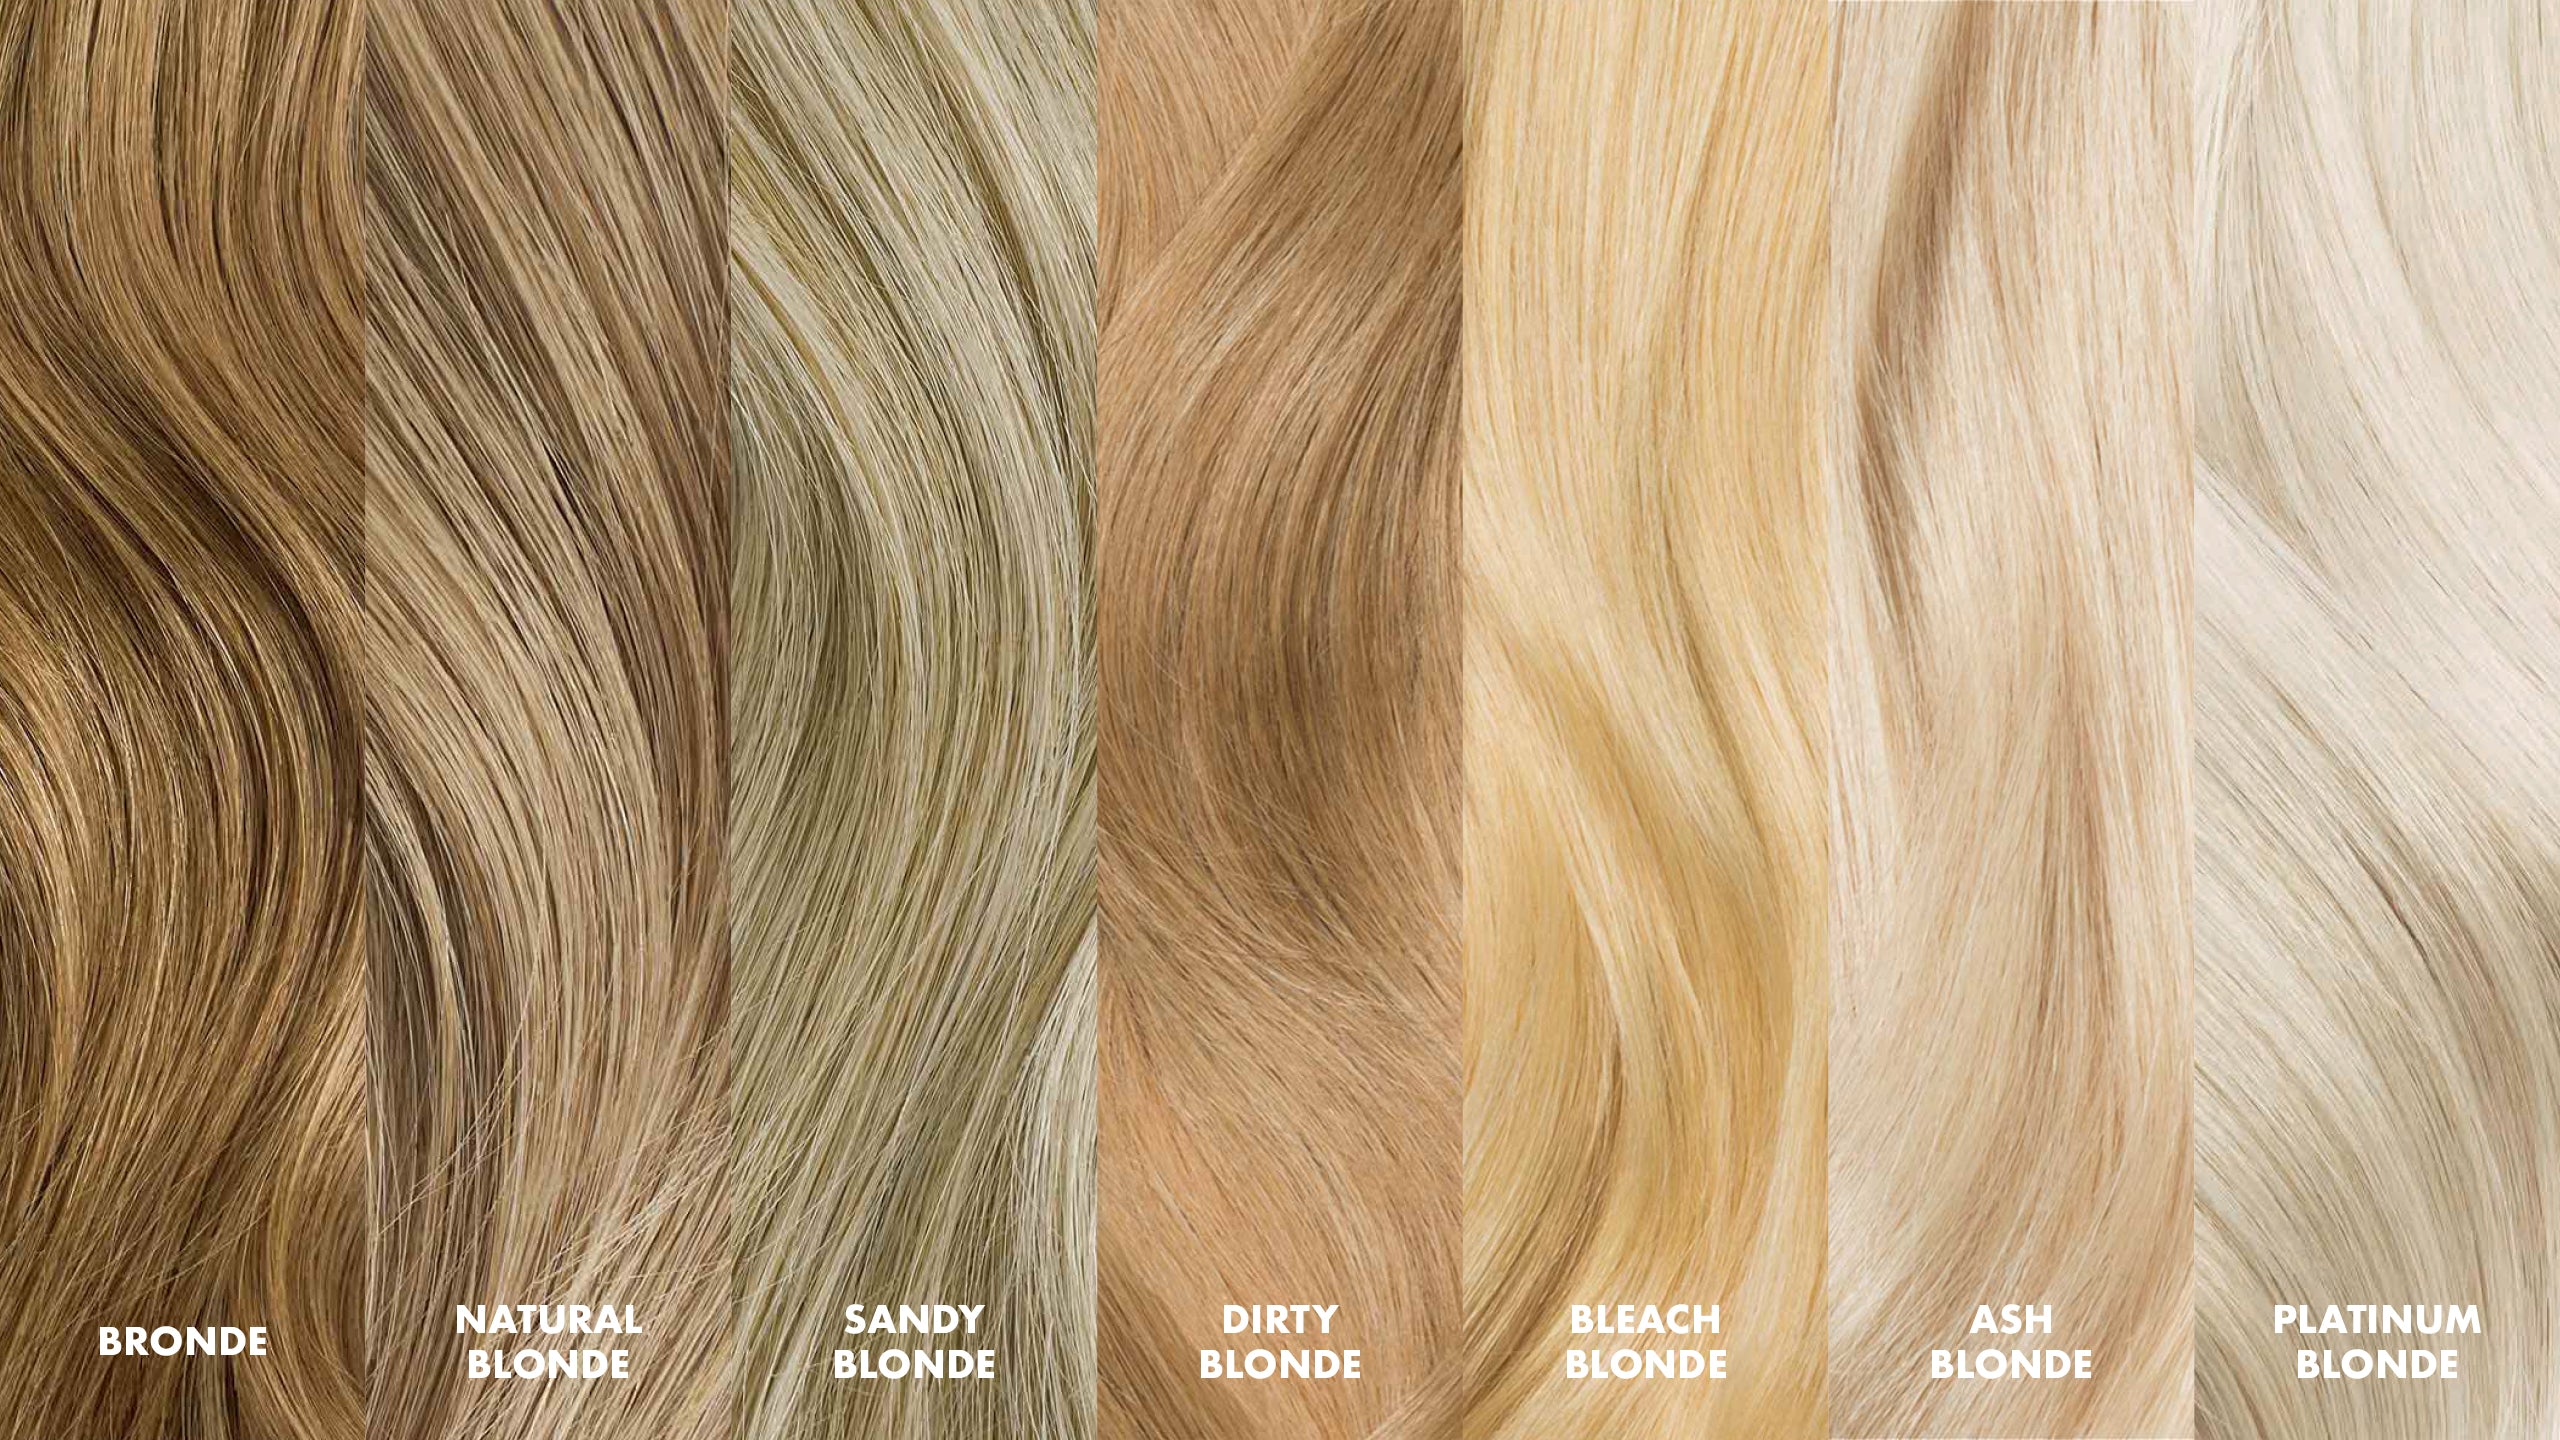 7. "Ash Blonde vs. Platinum Blonde: What's the Difference?" - wide 2